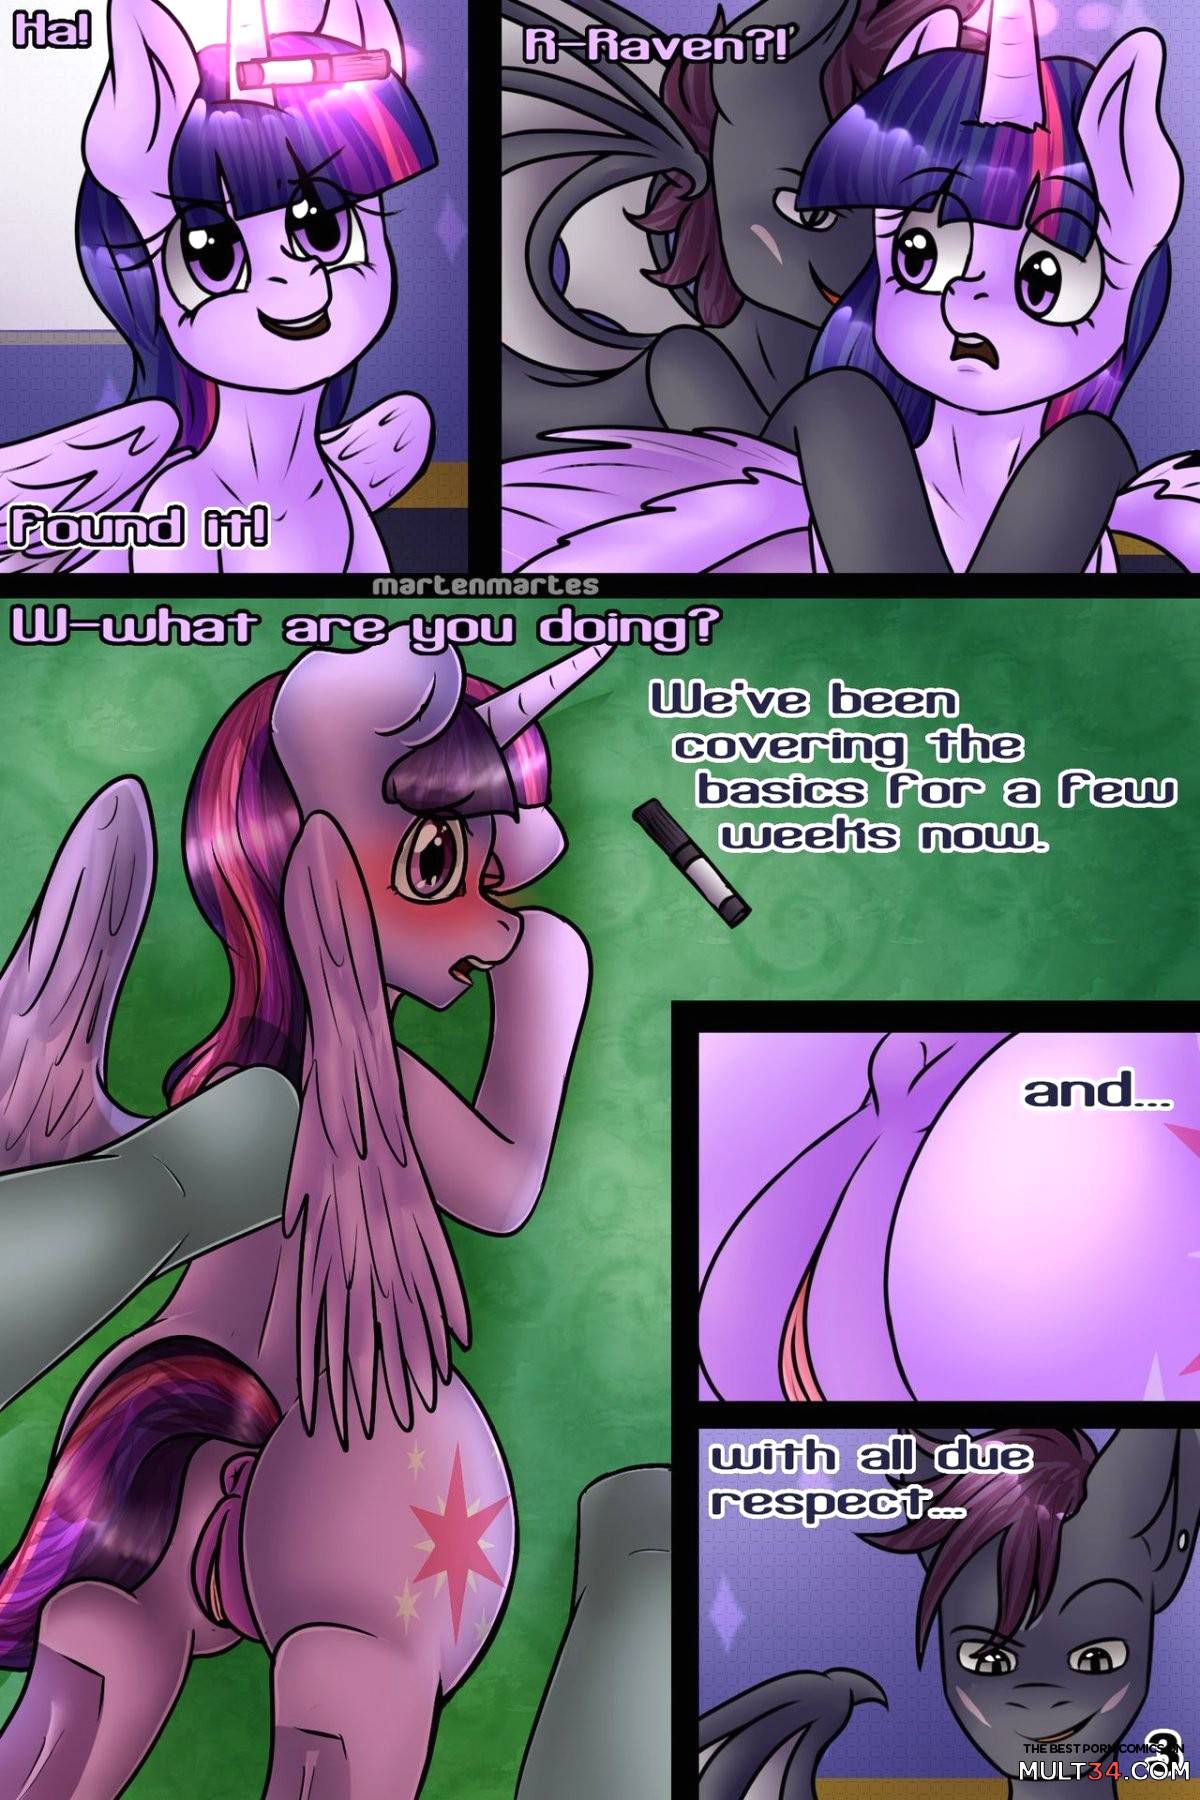 friendship lesson went sexual page 4